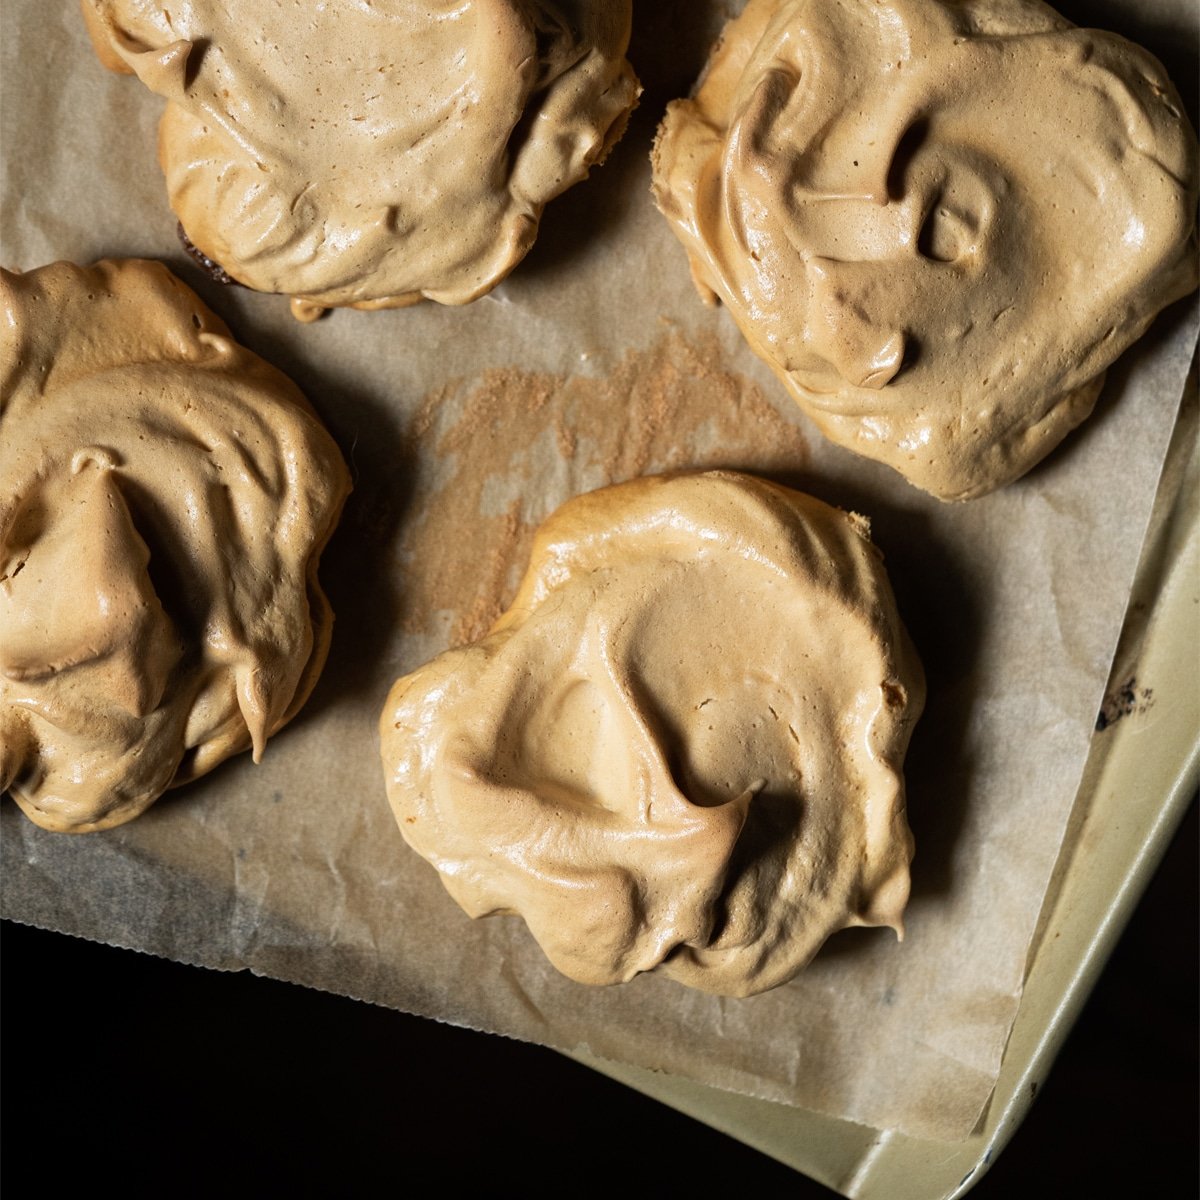 Freshly baked maple meringues on a baking tray